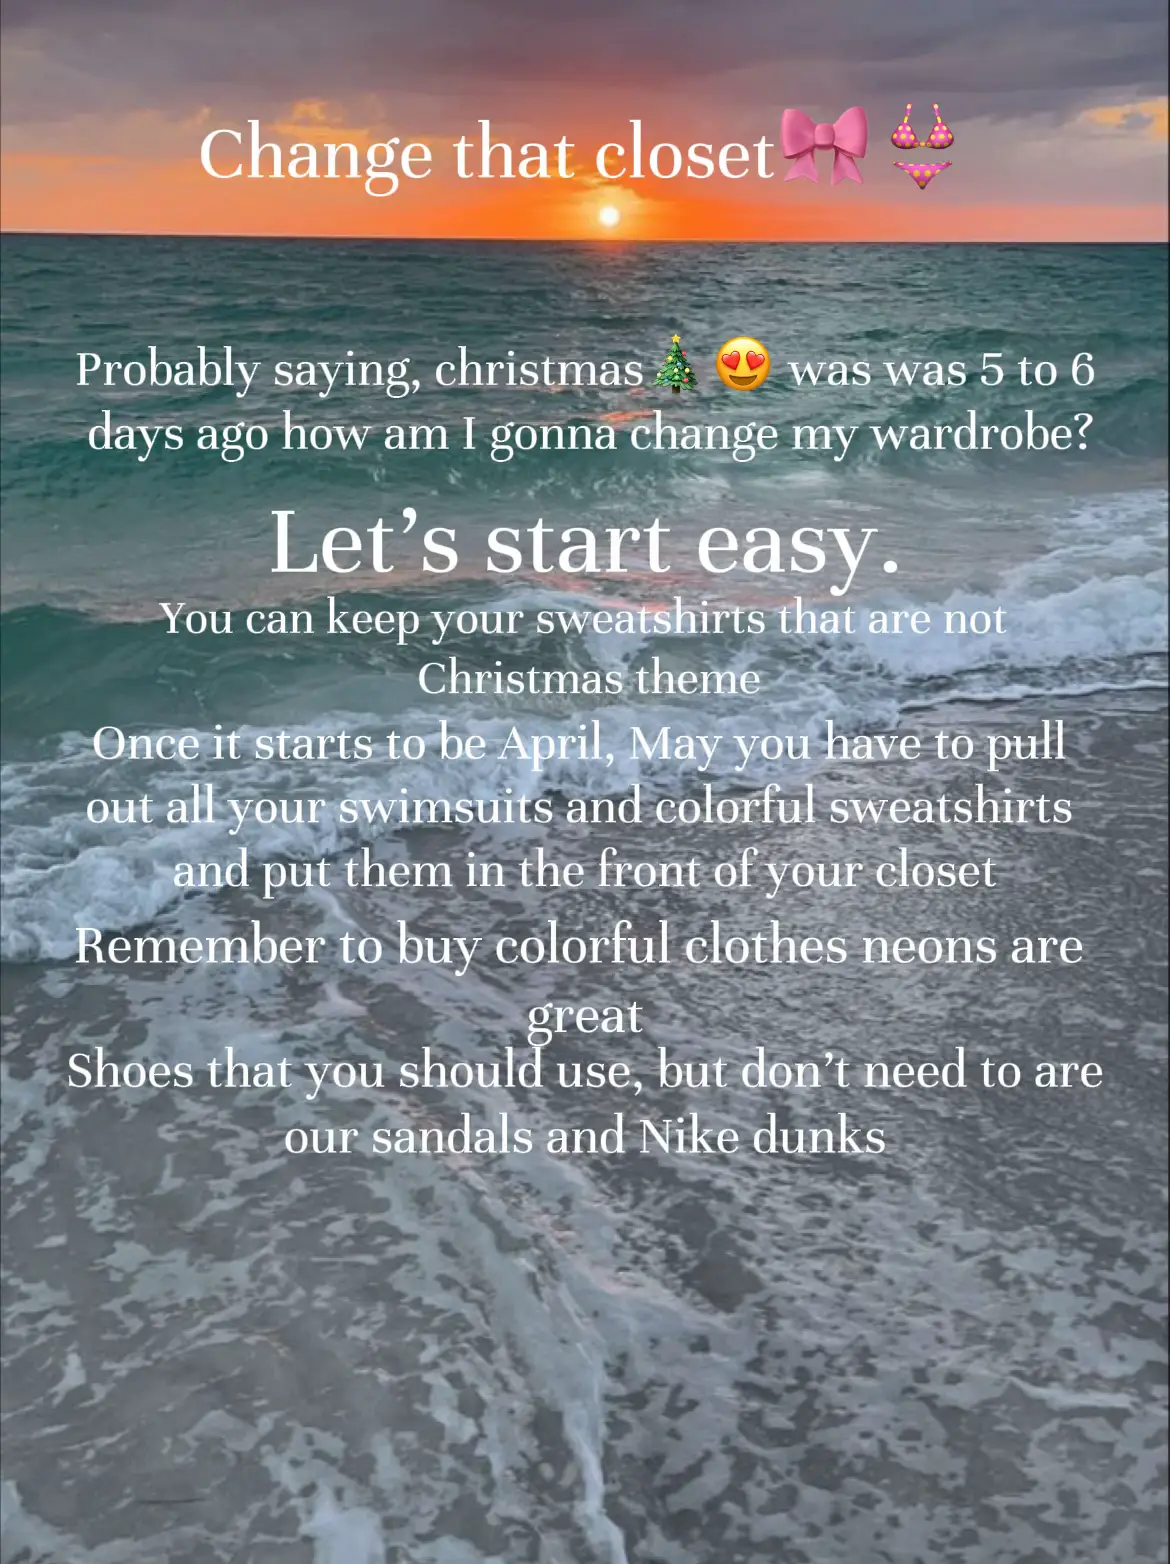  A beach scene with a quote about changing your wardrobe